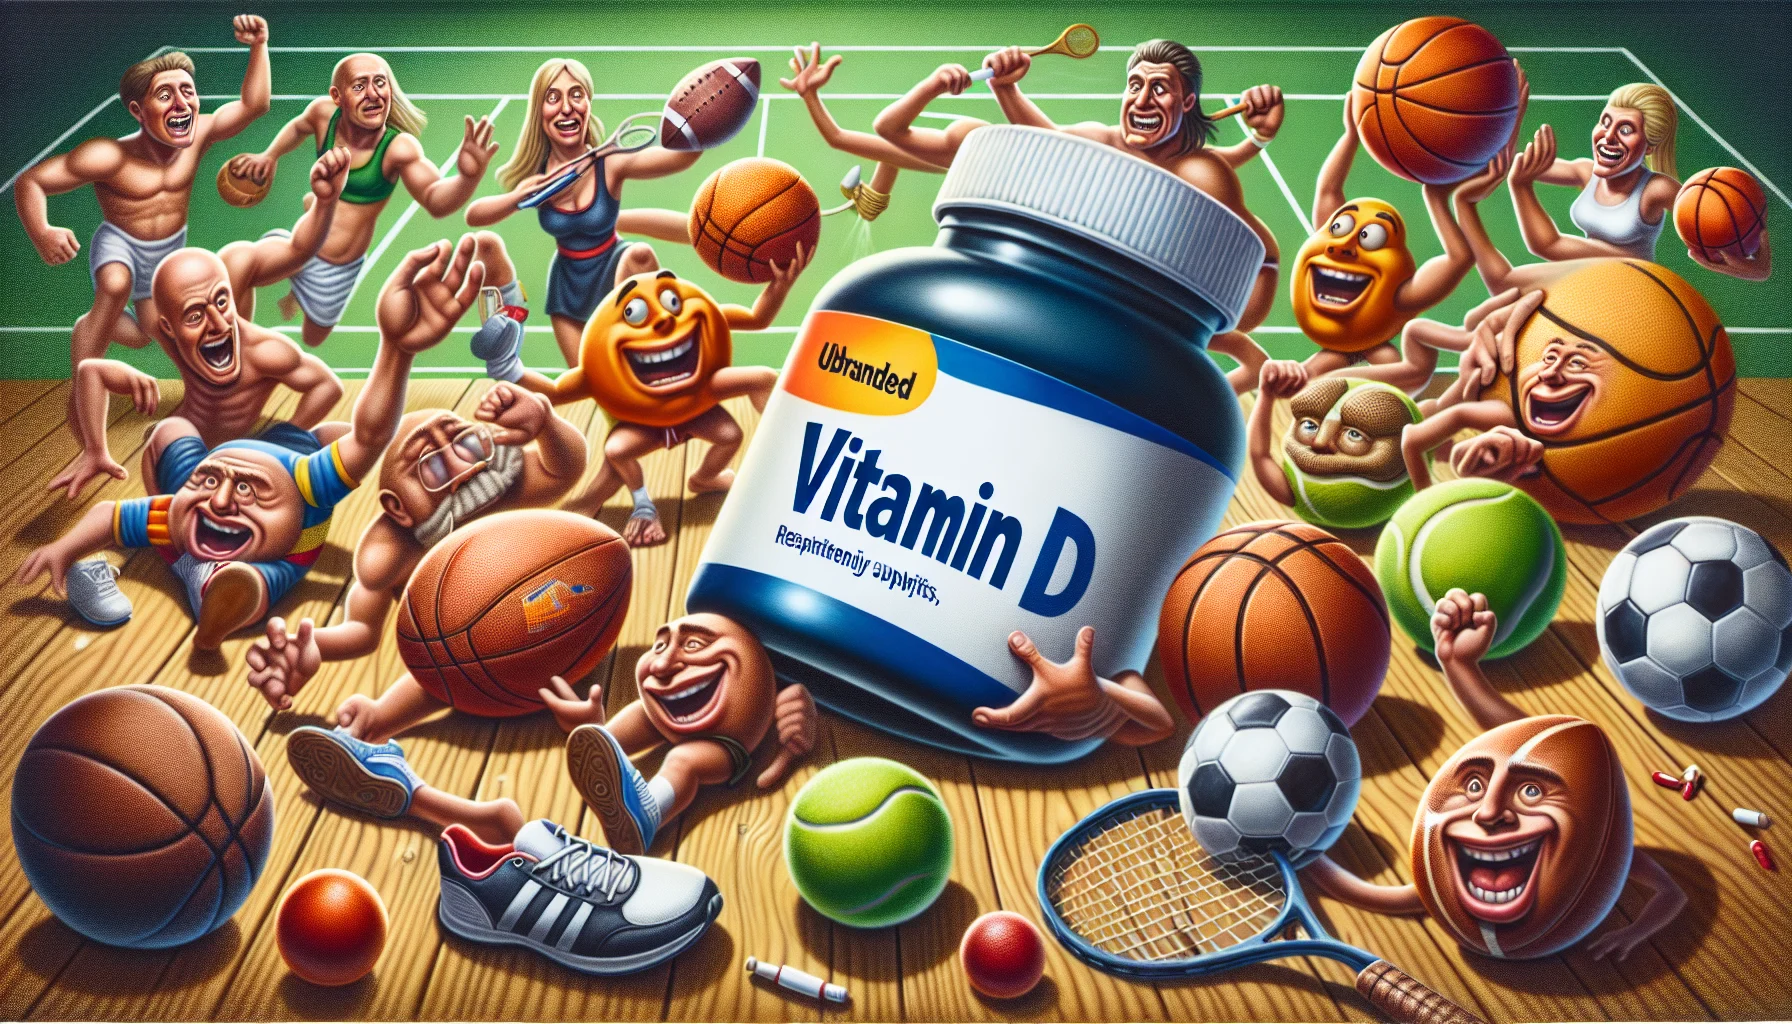 Craft a realistic image that brings humor to the foreground. Center the painting around a sports setting where various sports objects humorously trying to access an unbranded bottle of Vitamin D. The sports objects could include footballs, basketballs, and tennis rackets with faces and limbs, all positively reacting to the vitamin D supplement, signifying the benefit of such supplements for sporting activities. Keep the tone playful, lively, and imbued with a touch of humor. 